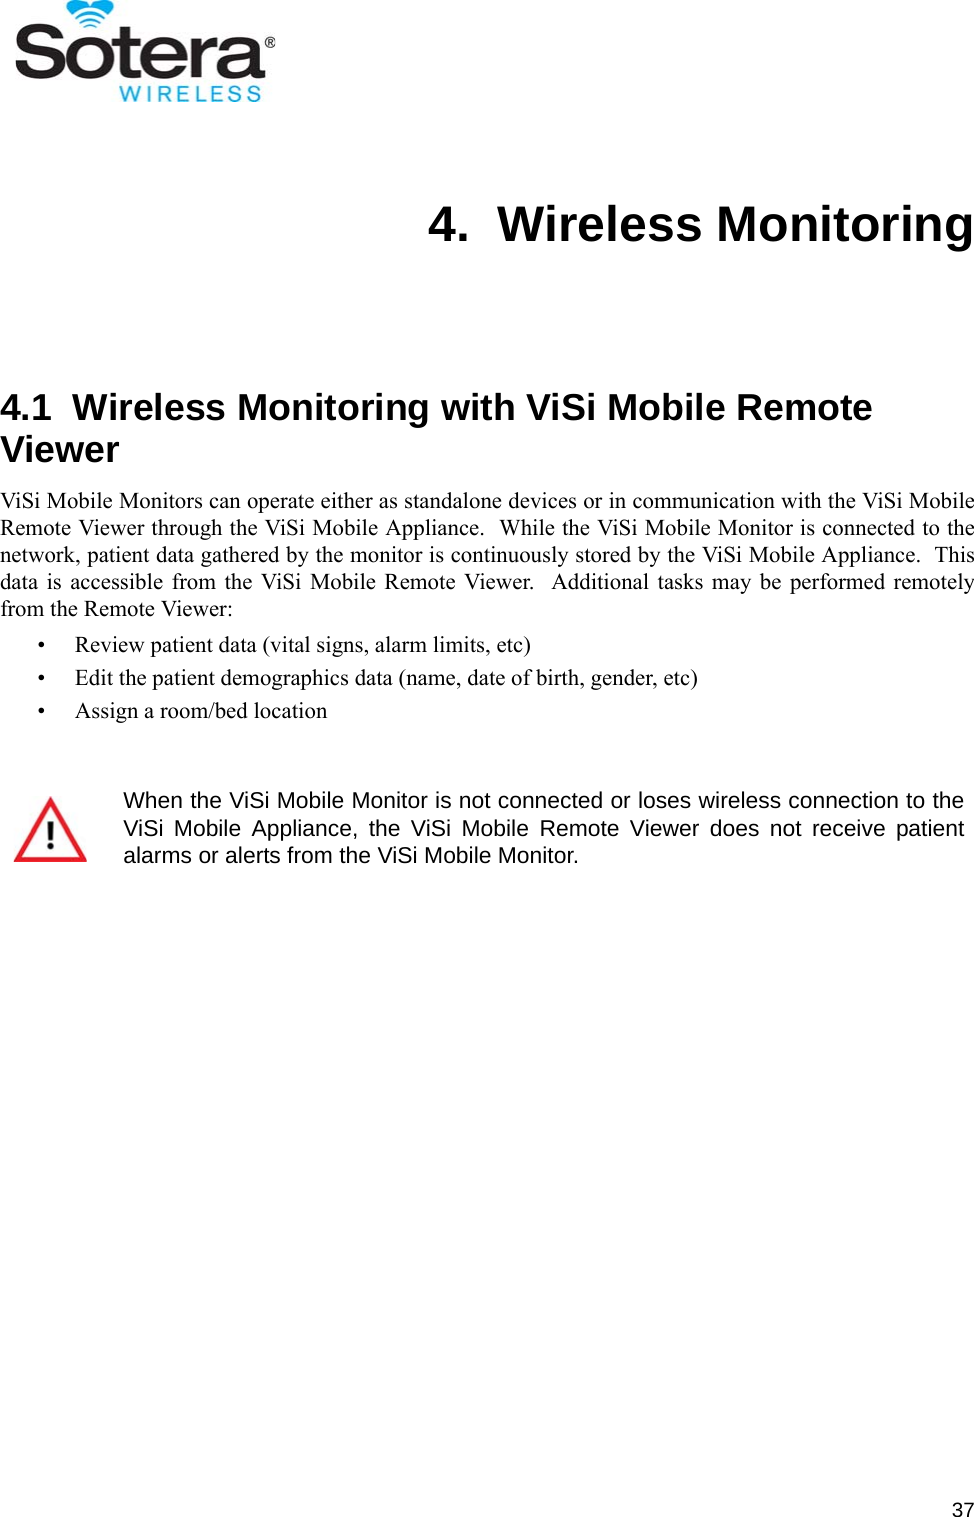 374.  Wireless Monitoring4.1  Wireless Monitoring with ViSi Mobile Remote ViewerViSi Mobile Monitors can operate either as standalone devices or in communication with the ViSi MobileRemote Viewer through the ViSi Mobile Appliance.  While the ViSi Mobile Monitor is connected to thenetwork, patient data gathered by the monitor is continuously stored by the ViSi Mobile Appliance.  Thisdata is accessible from the ViSi Mobile Remote Viewer.  Additional tasks may be performed remotelyfrom the Remote Viewer:• Review patient data (vital signs, alarm limits, etc)• Edit the patient demographics data (name, date of birth, gender, etc)• Assign a room/bed locationWhen the ViSi Mobile Monitor is not connected or loses wireless connection to theViSi Mobile Appliance, the ViSi Mobile Remote Viewer does not receive patientalarms or alerts from the ViSi Mobile Monitor.